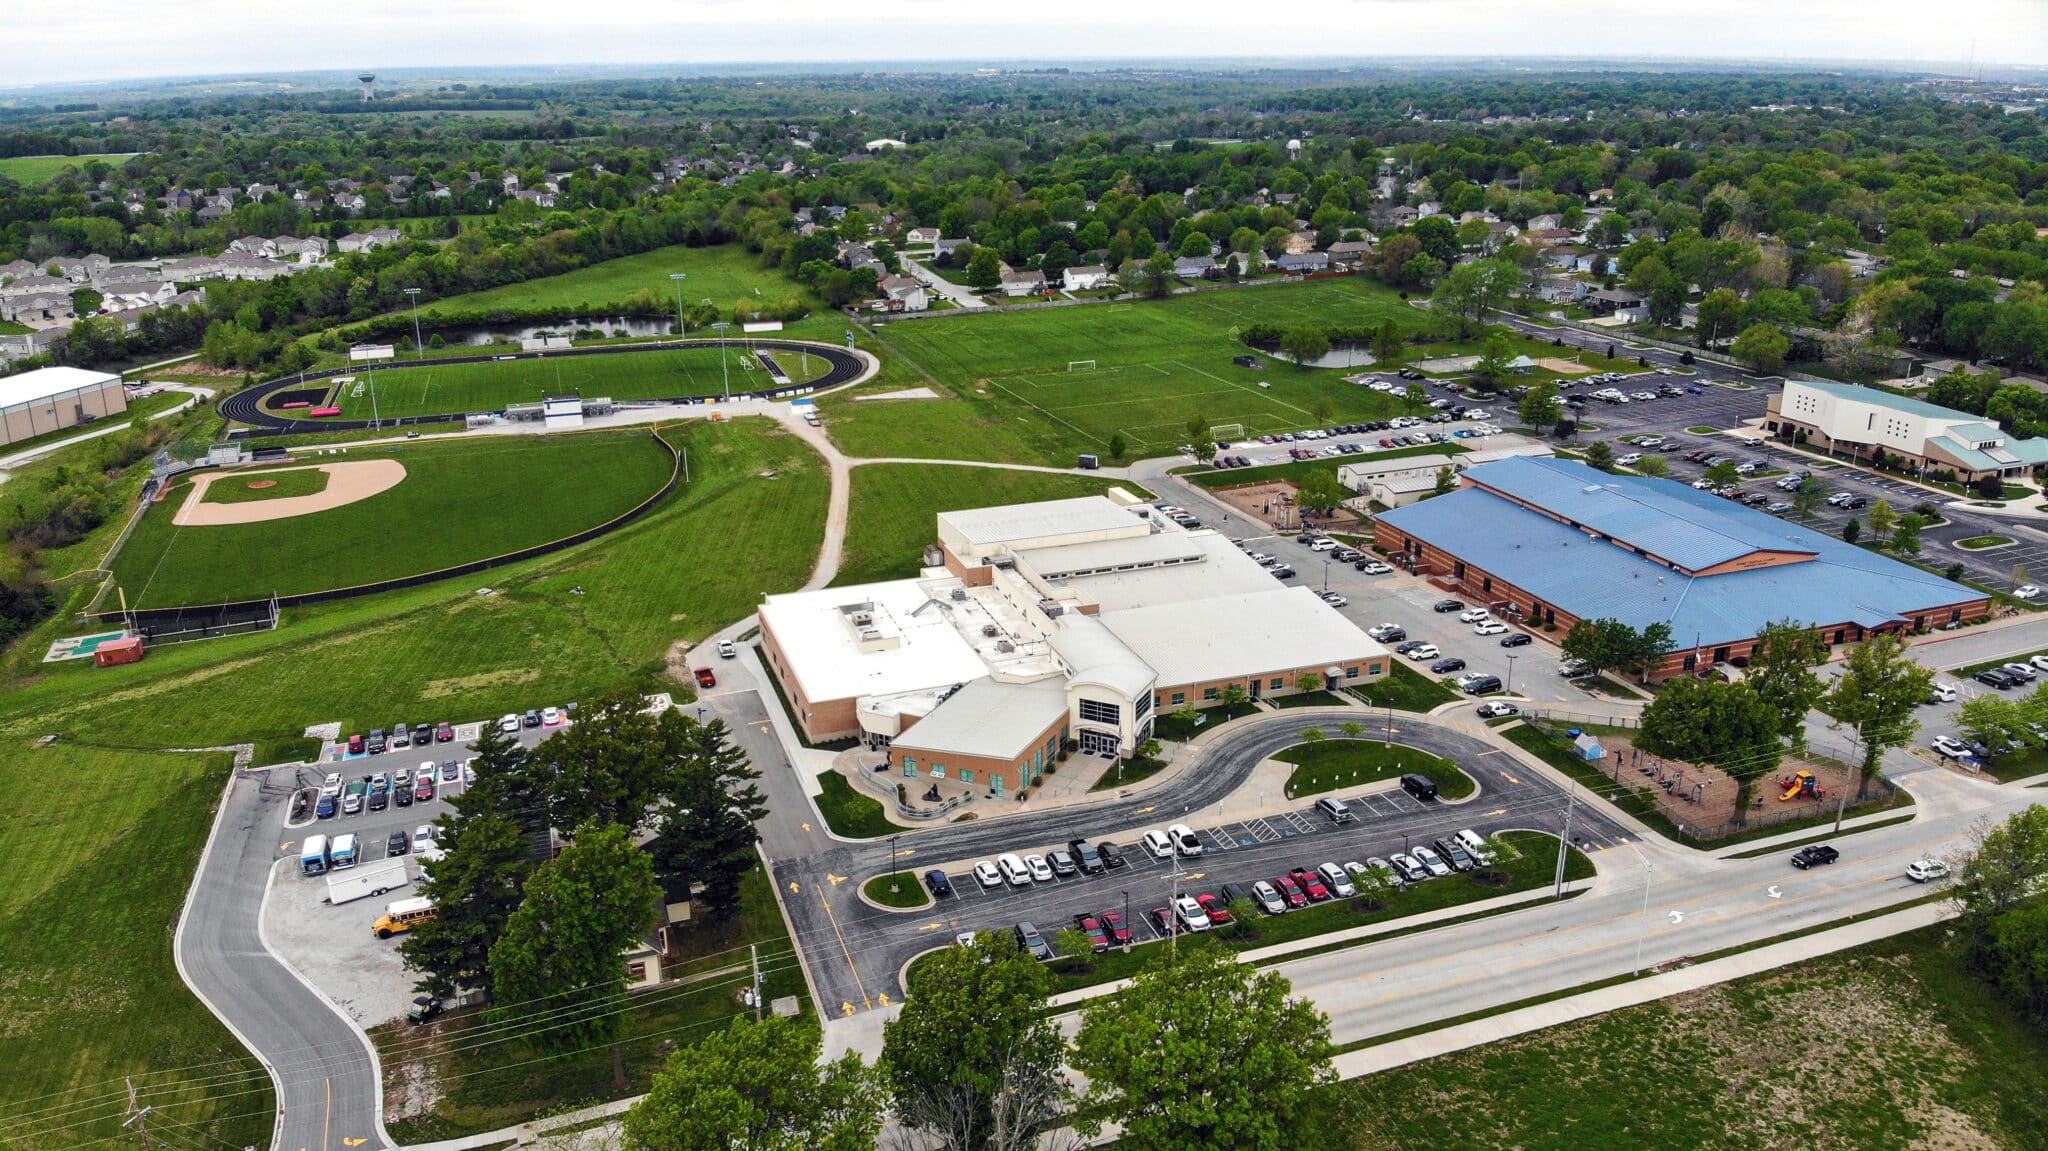 Summit Christian Academy has been ranked first in the Kansas City Business Journal’s list of Top Area Private Schools. This is SCA’s ninth consecutive year to be ranked in the top five.